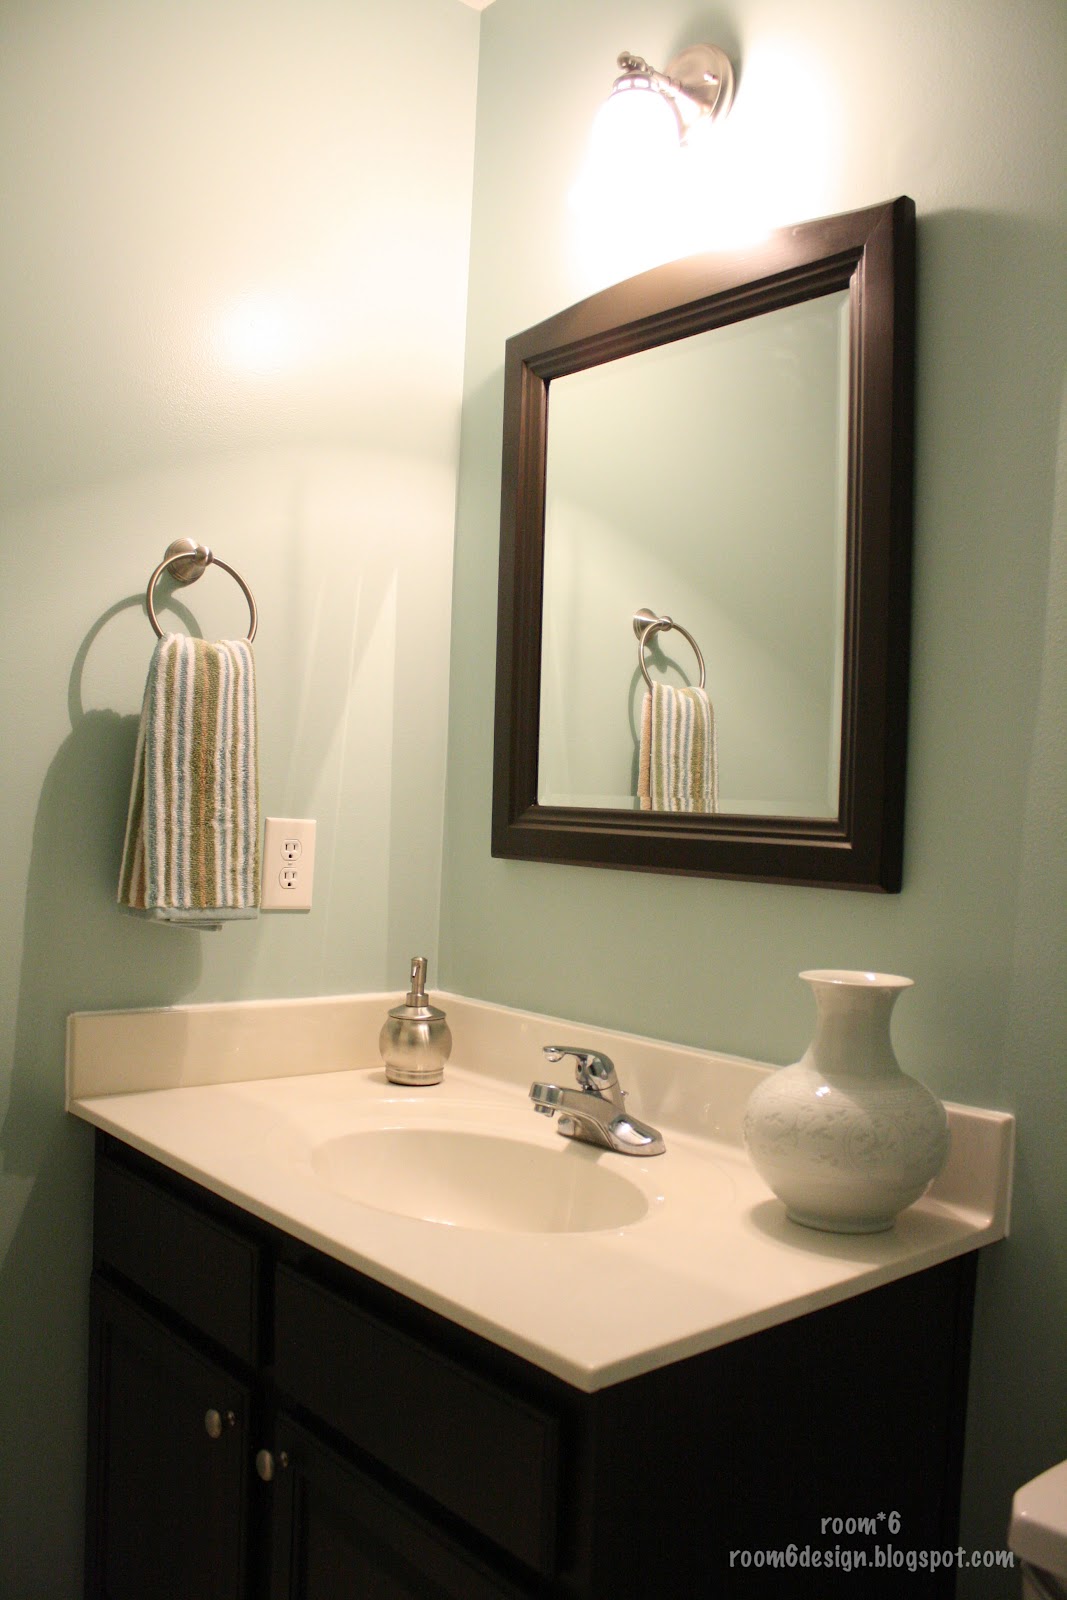 room*6: The Powder Room is FINISHED!